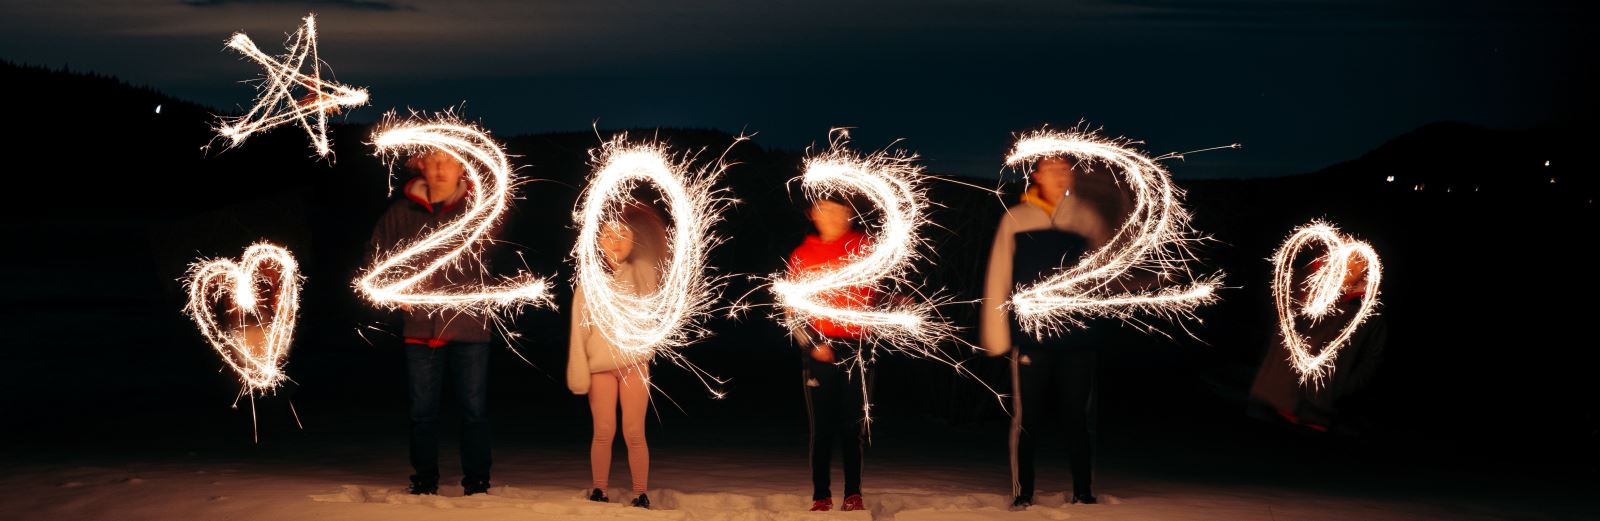 Photograph of people spelling out 2022 with sparklers